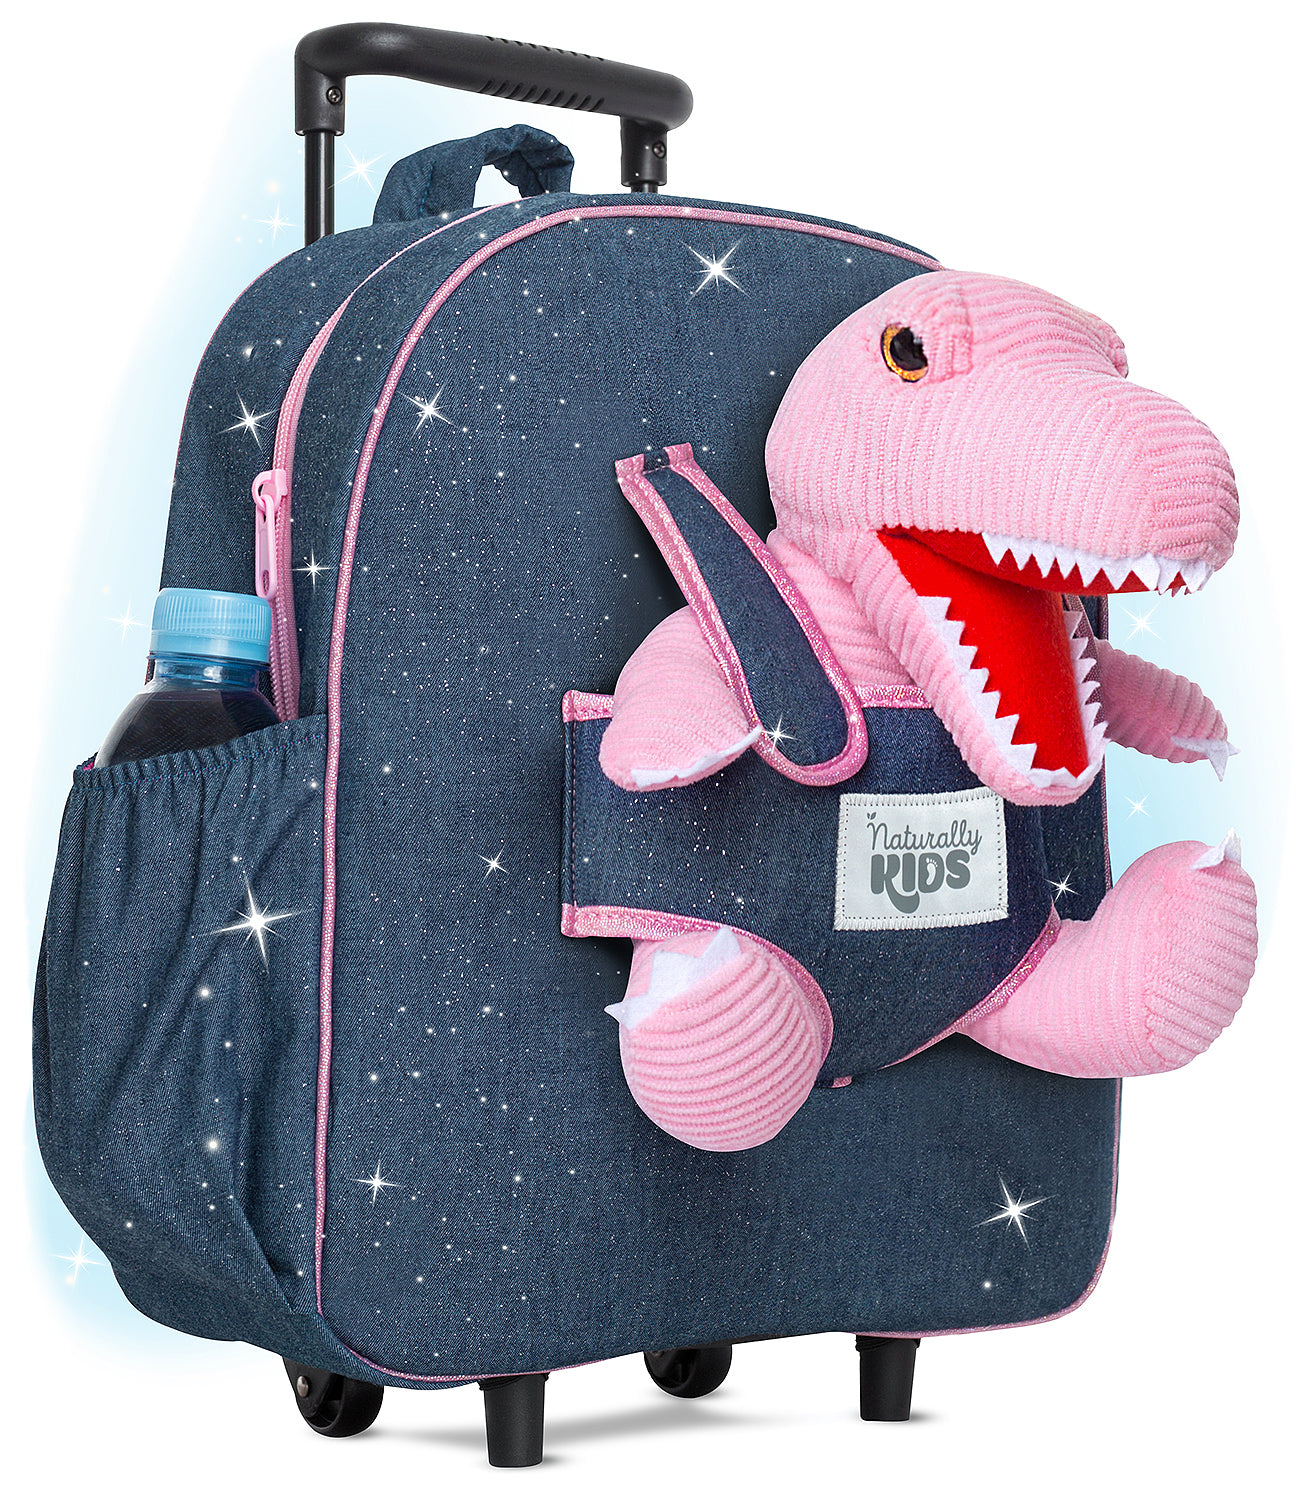 Dinosaur Sack Bag - Birthday party return gifts for kids and party supplies